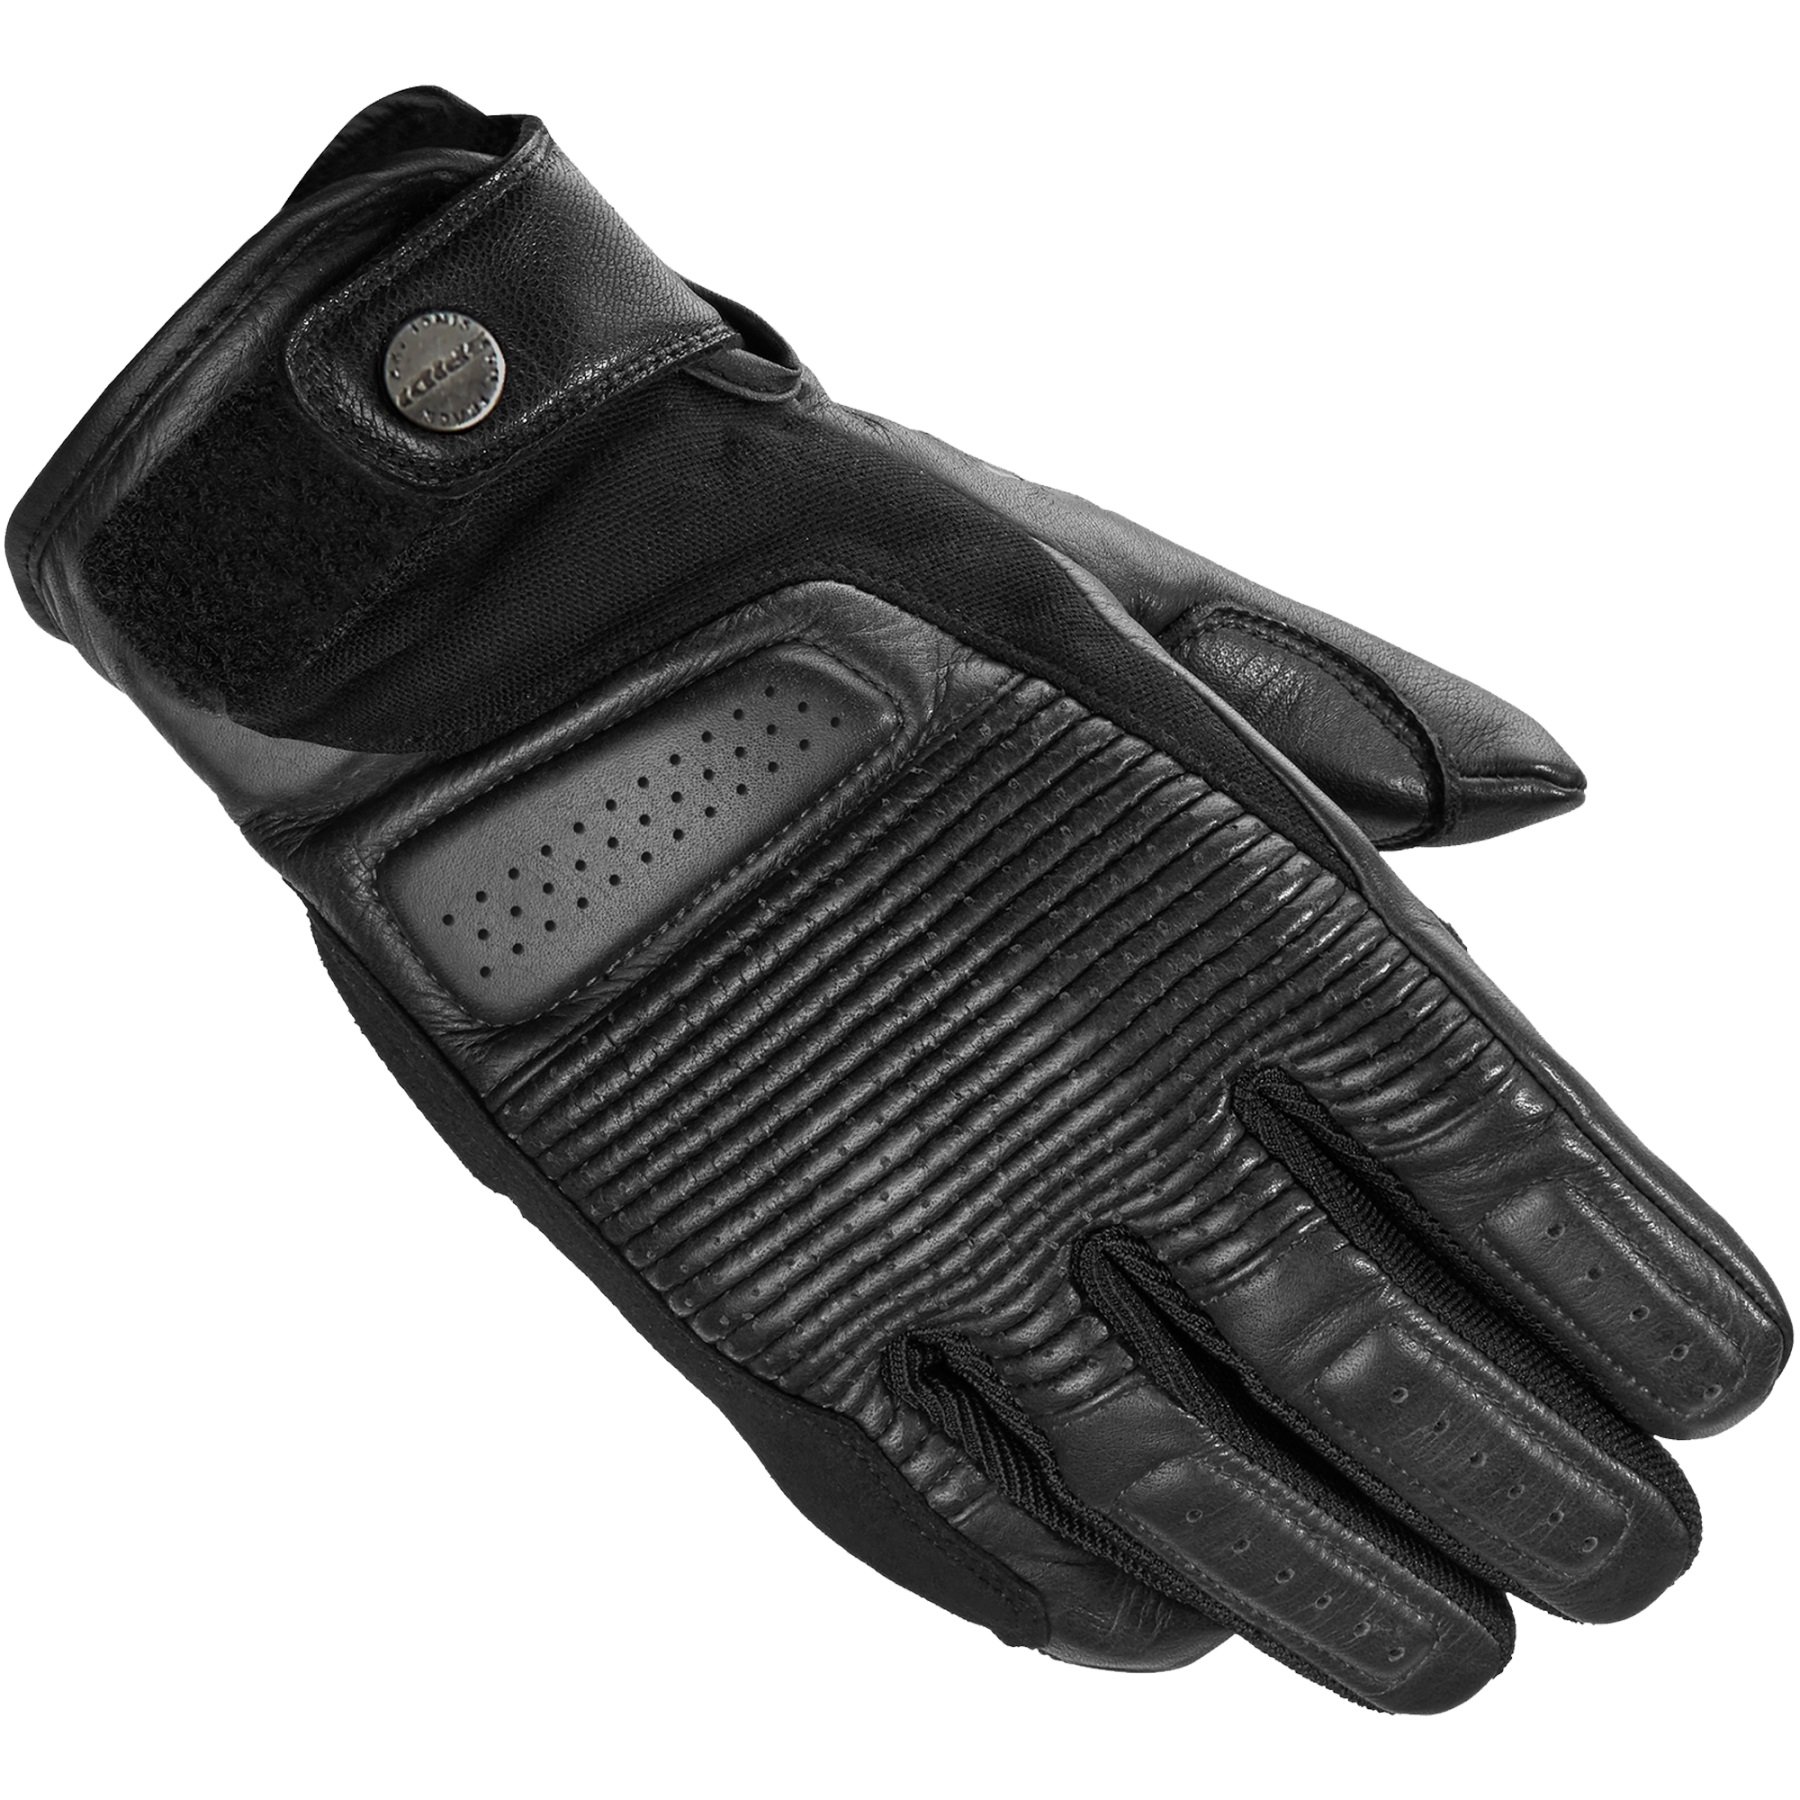 Image of Spidi Clubber Black Motorcycle Gloves Talla S